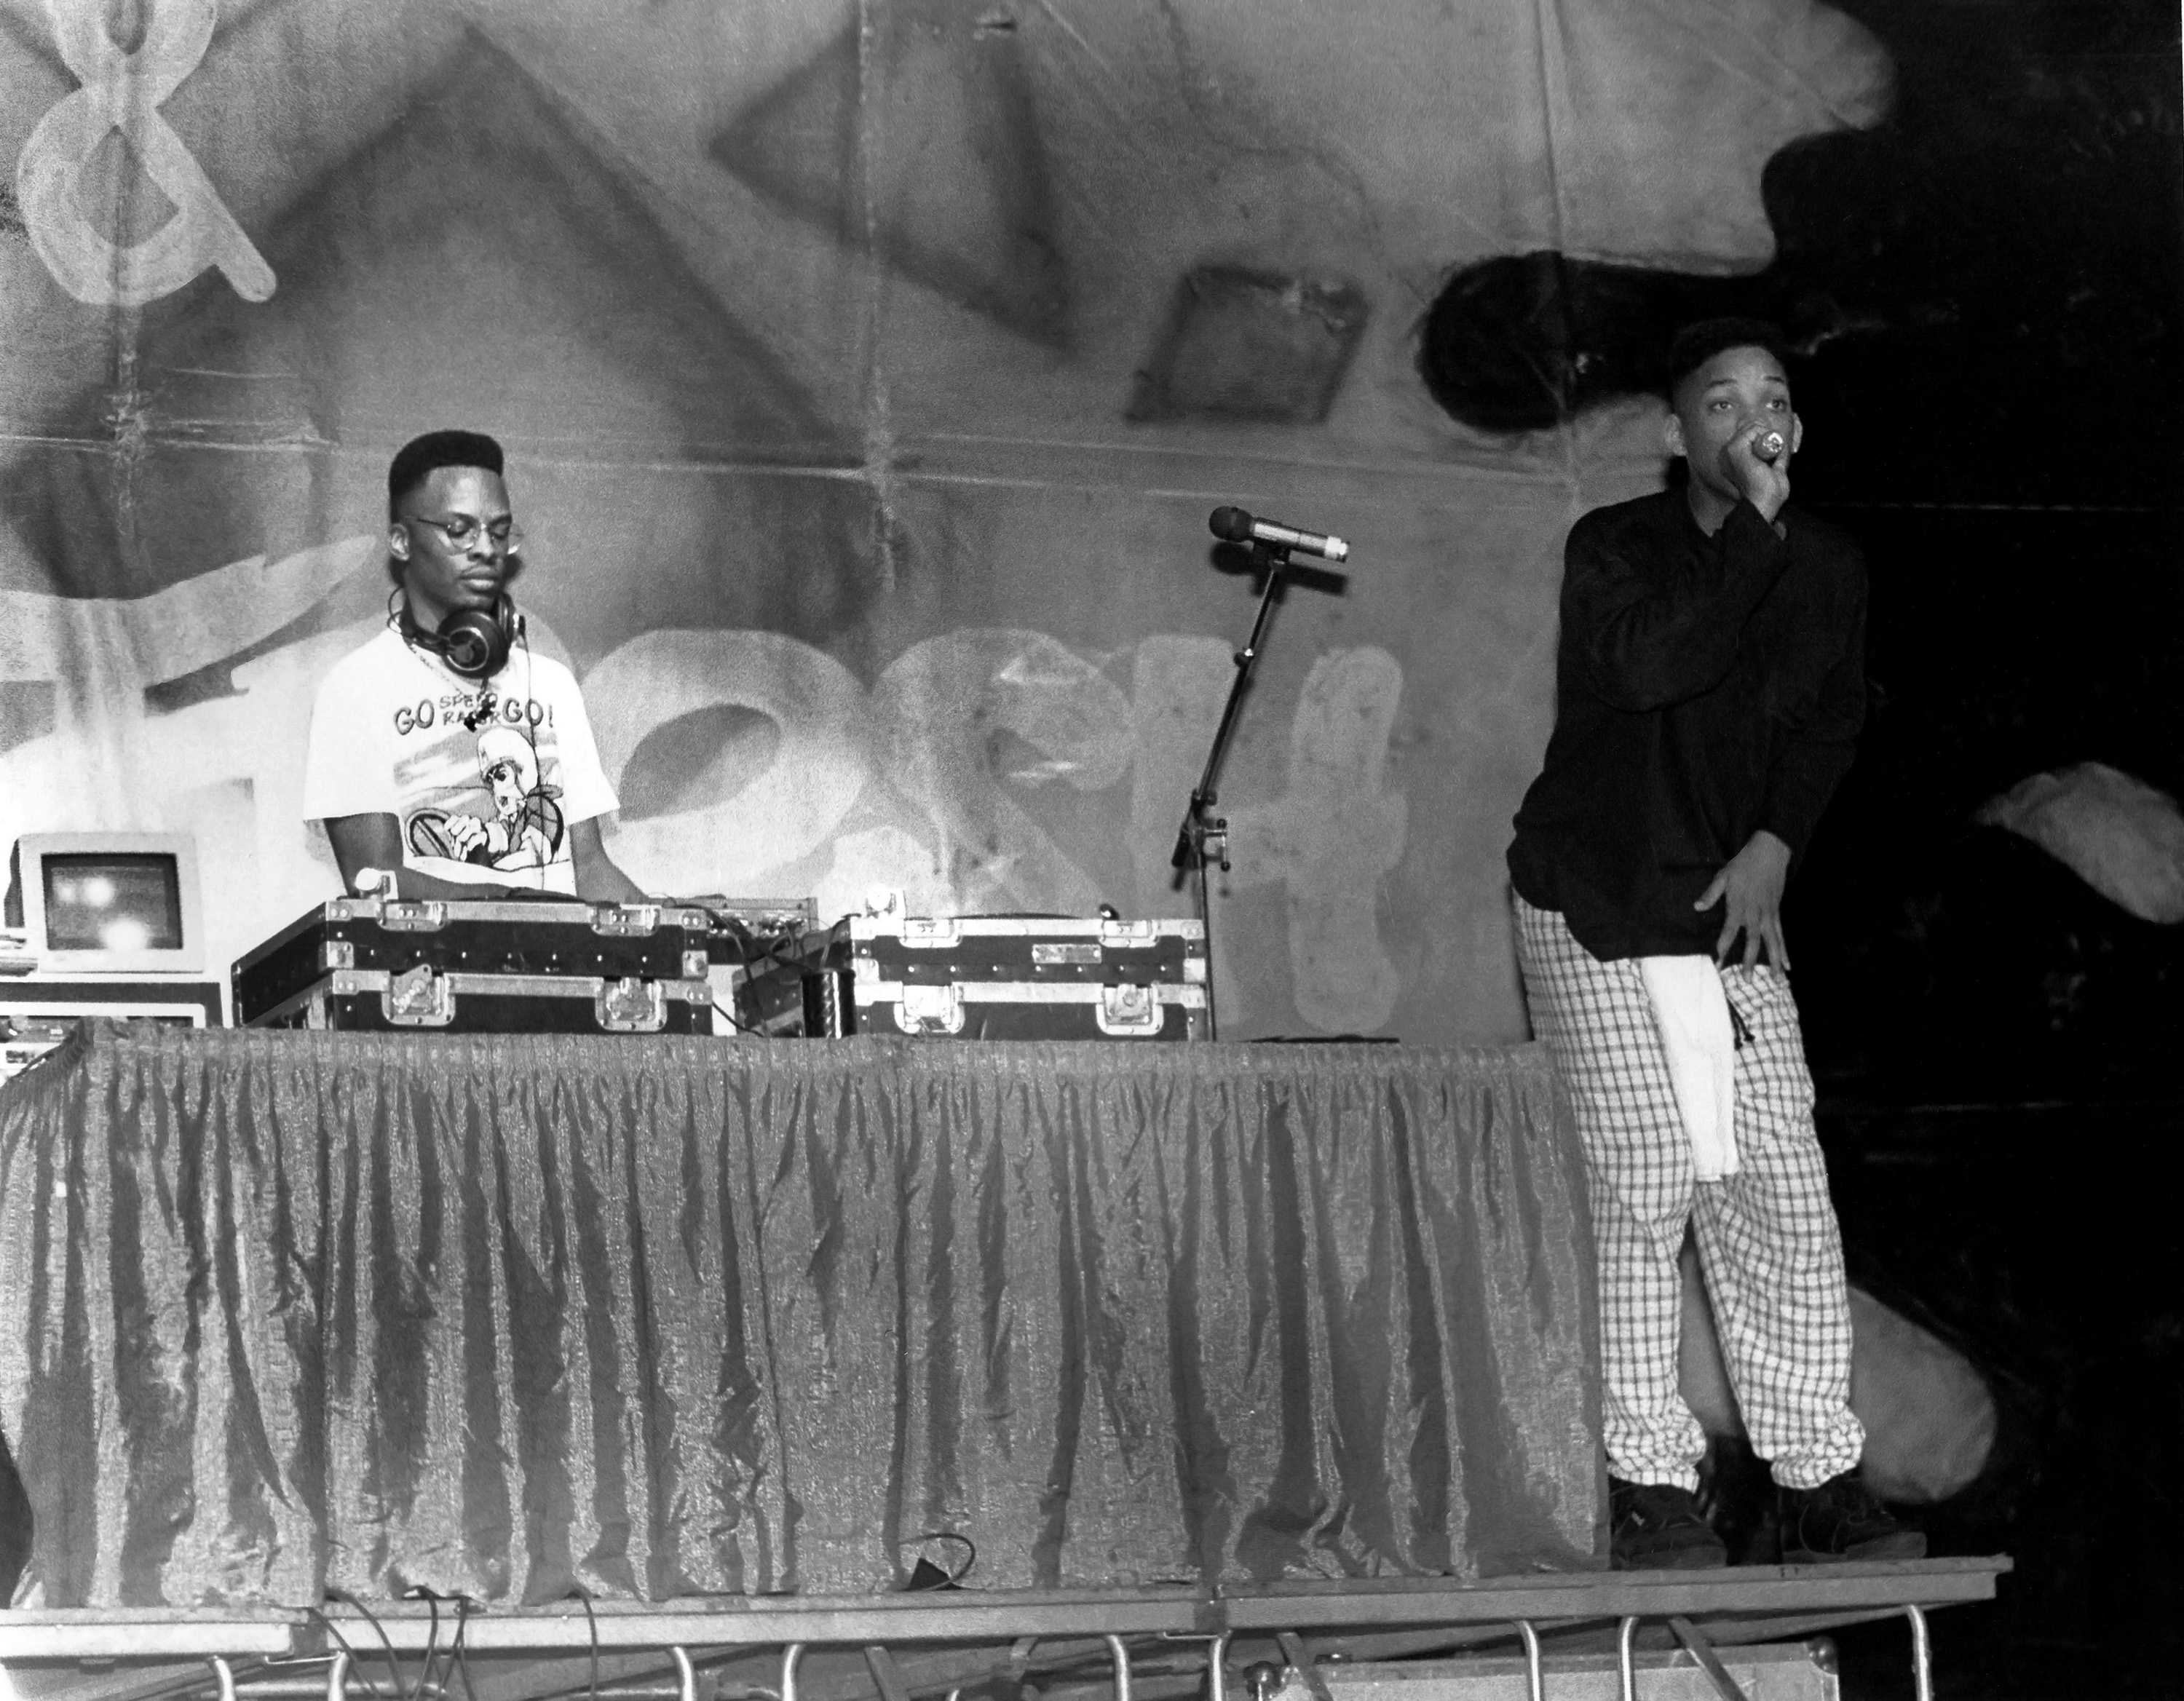 DJ Jazzy Jeff is behind a table, mixing a record, while Will Smith is rapping into a microphone.